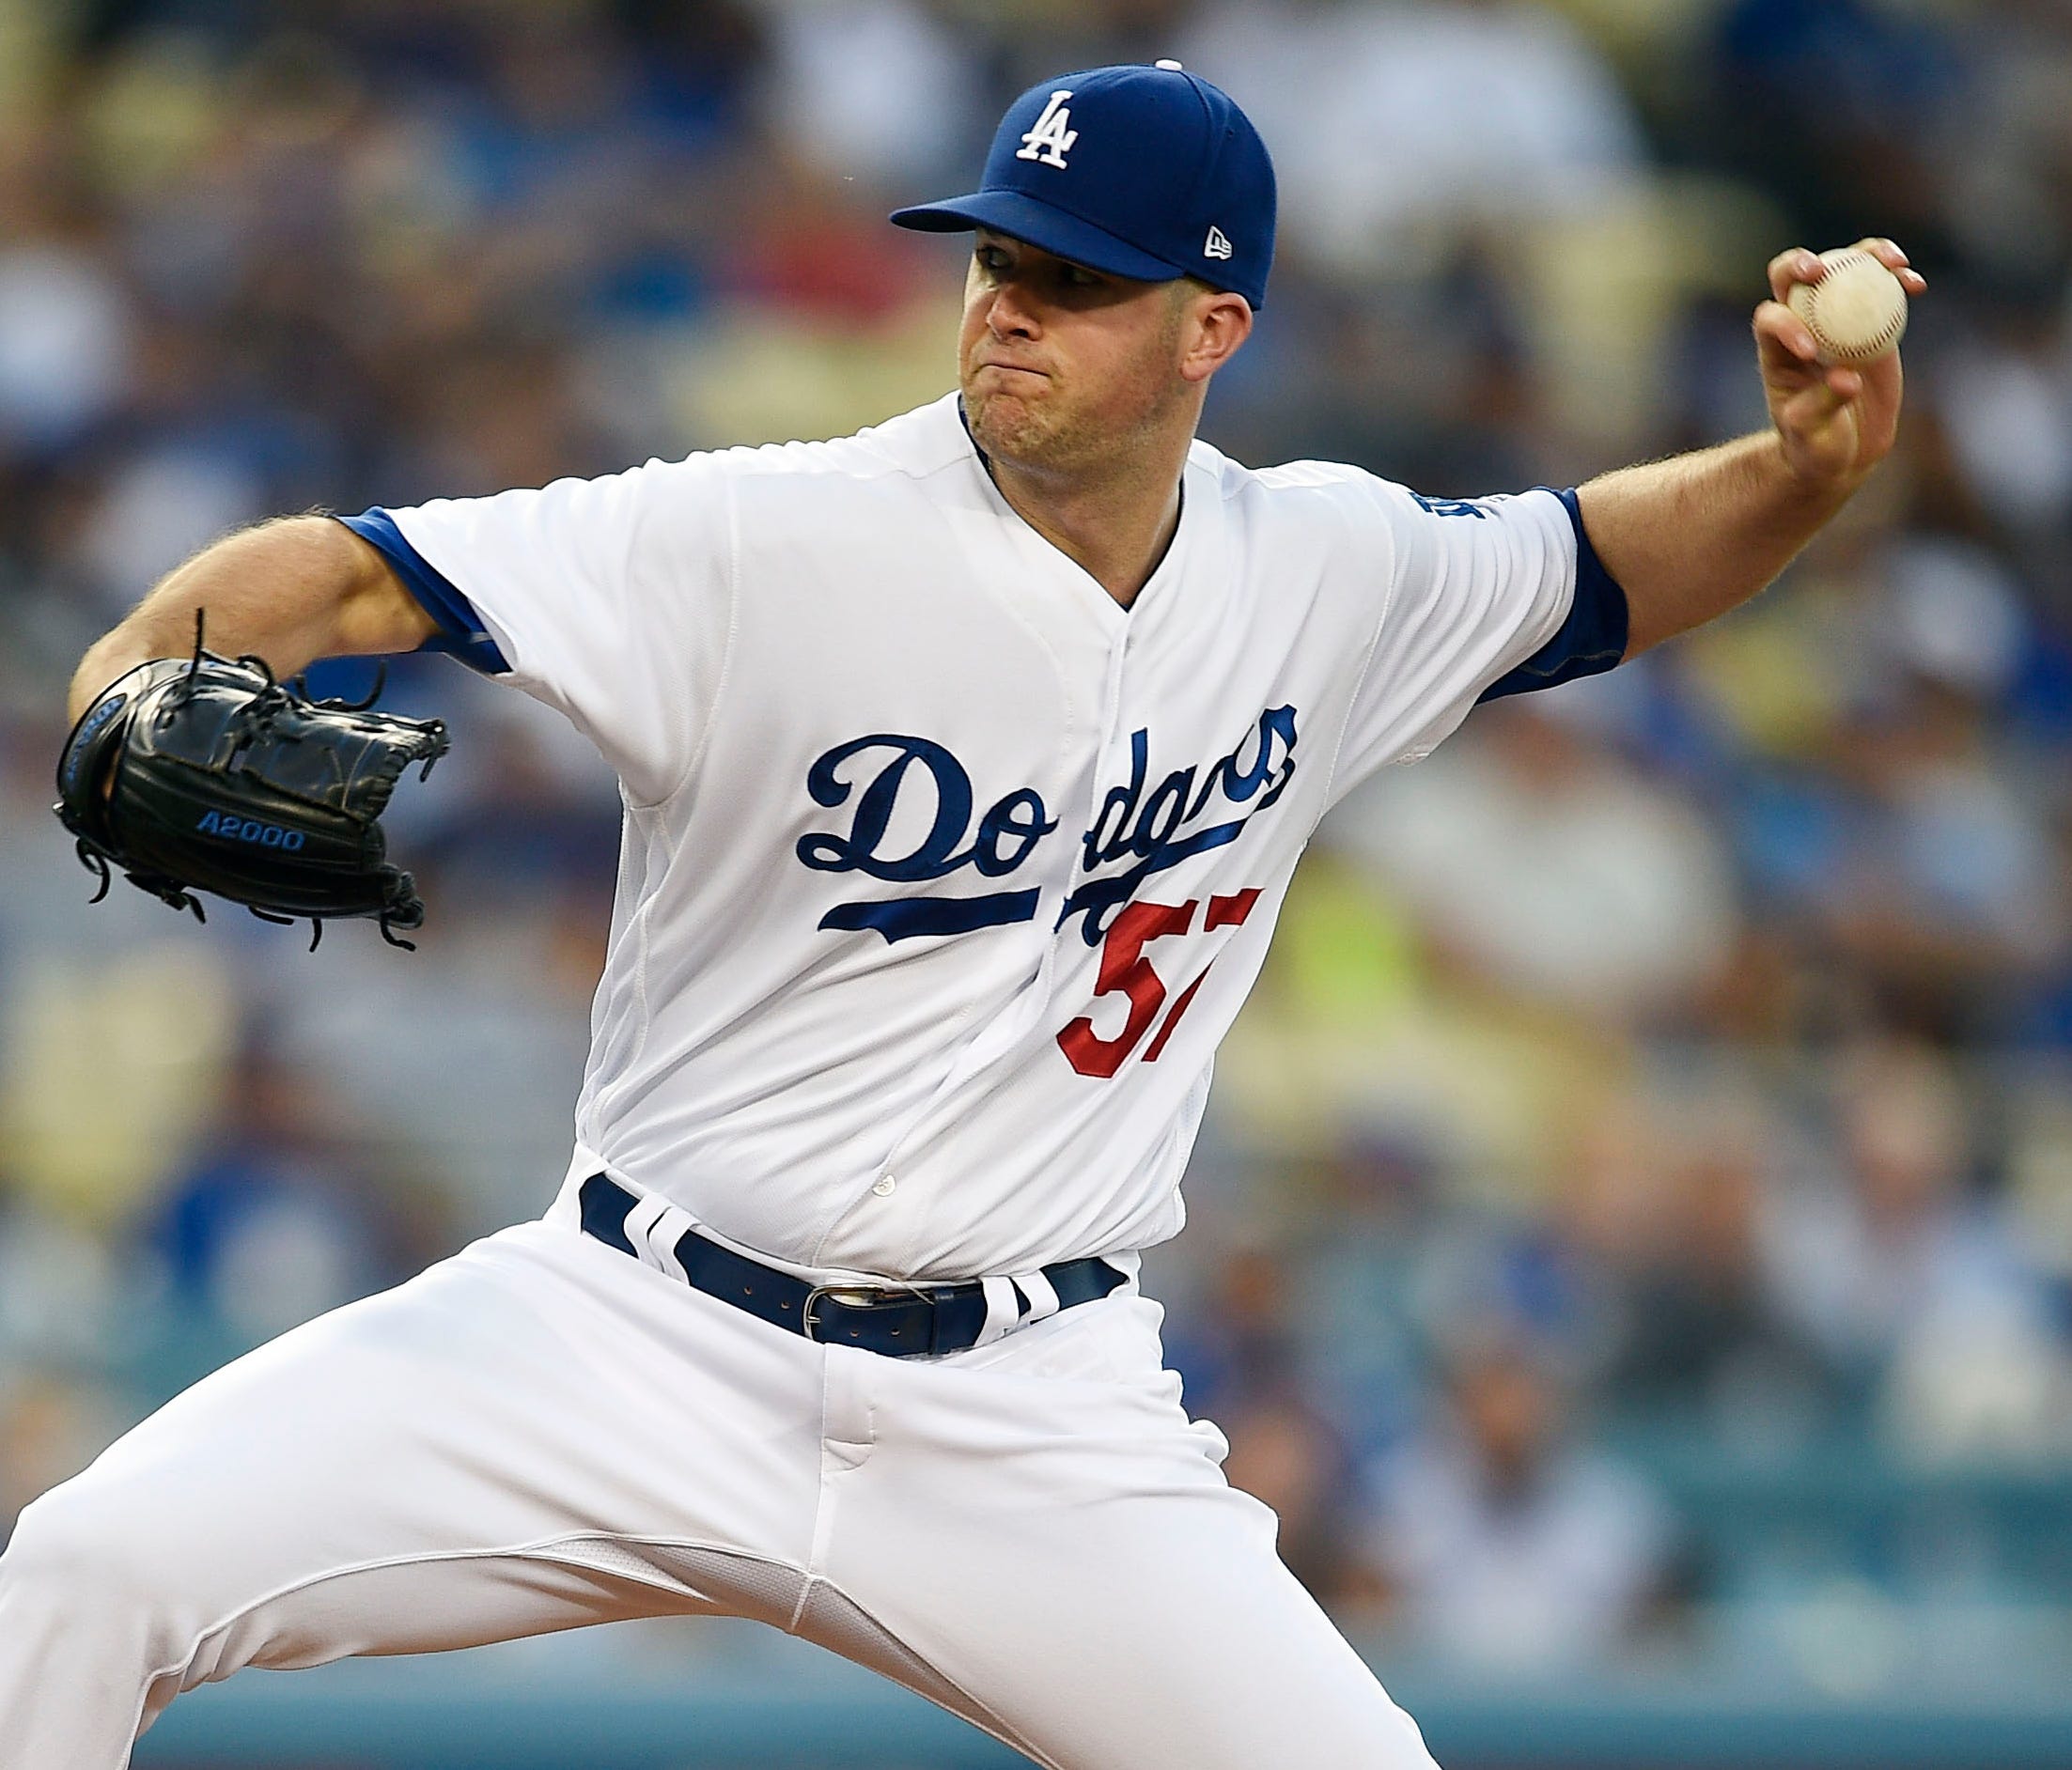 Alex Wood allowed just one run over six innings of work to improve to 8-0 on the season.